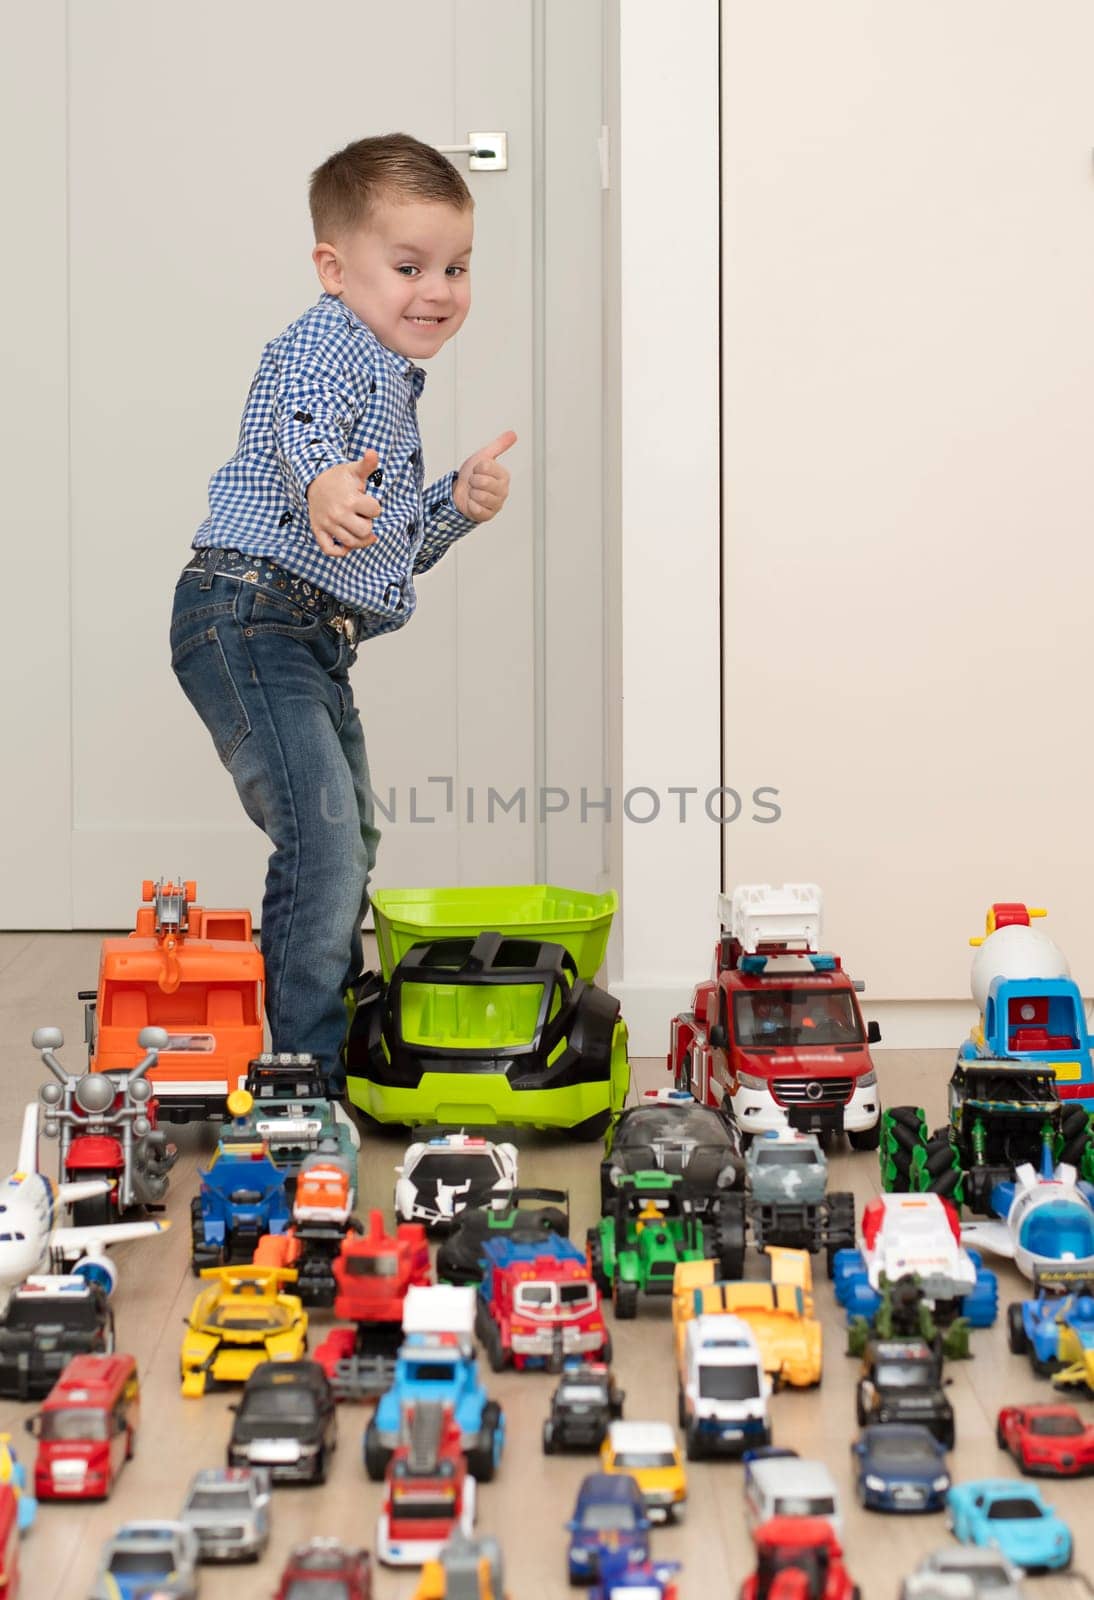 Children. Toy cars. A small cheerful and handsome boy, 4 years old, wearing a checkered shirt, plays with many colorful cars in a home interior. The toys are placed evenly on the floor.